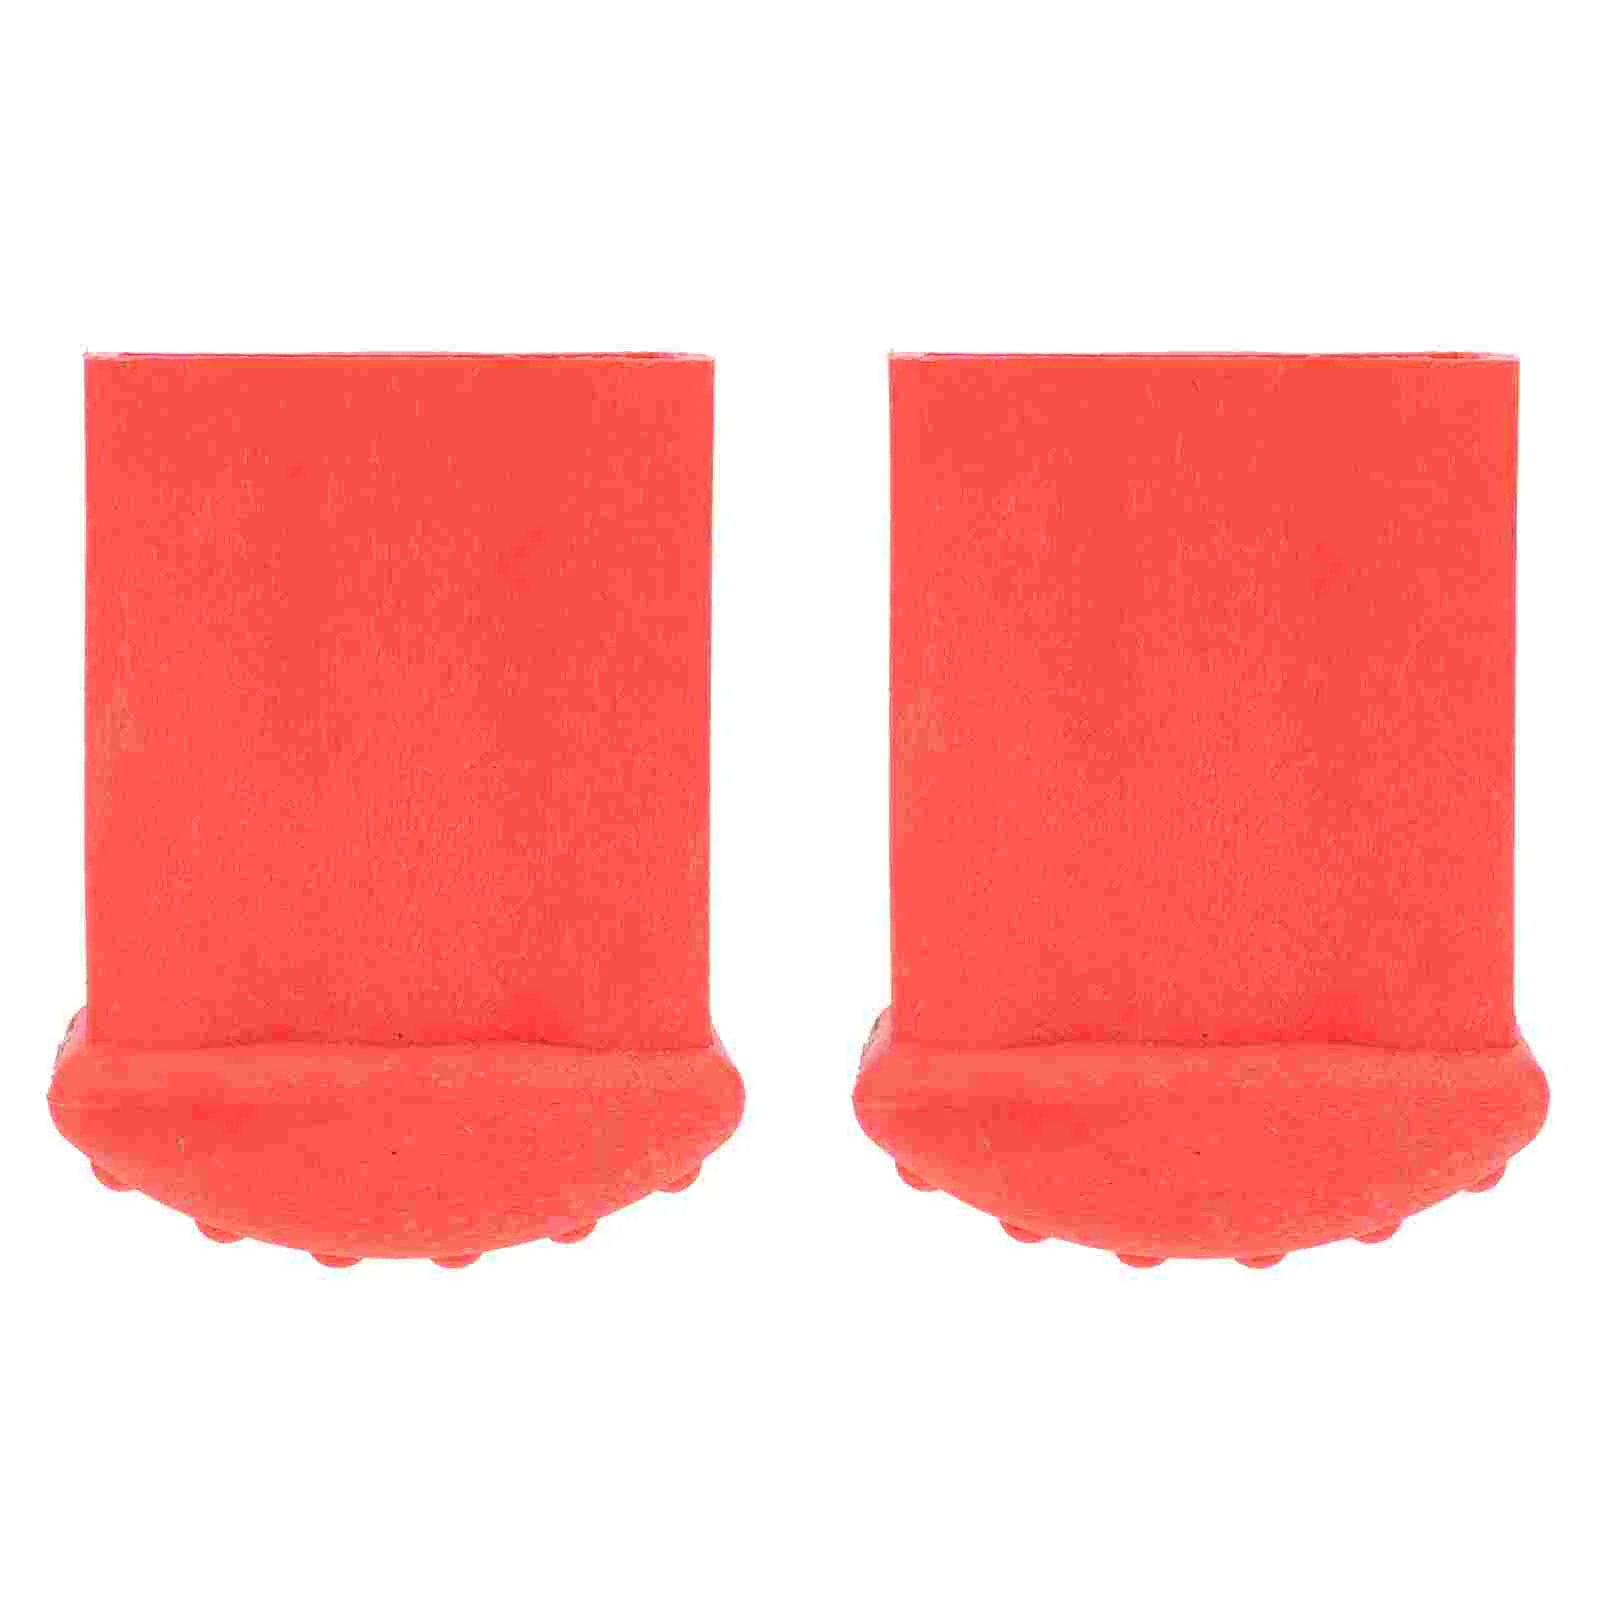 

2 Pcs Ladder Non-slip Feet Butt Mat Telescopic Foot Pad Engineering Pads Rubber Protective Ladders for Home